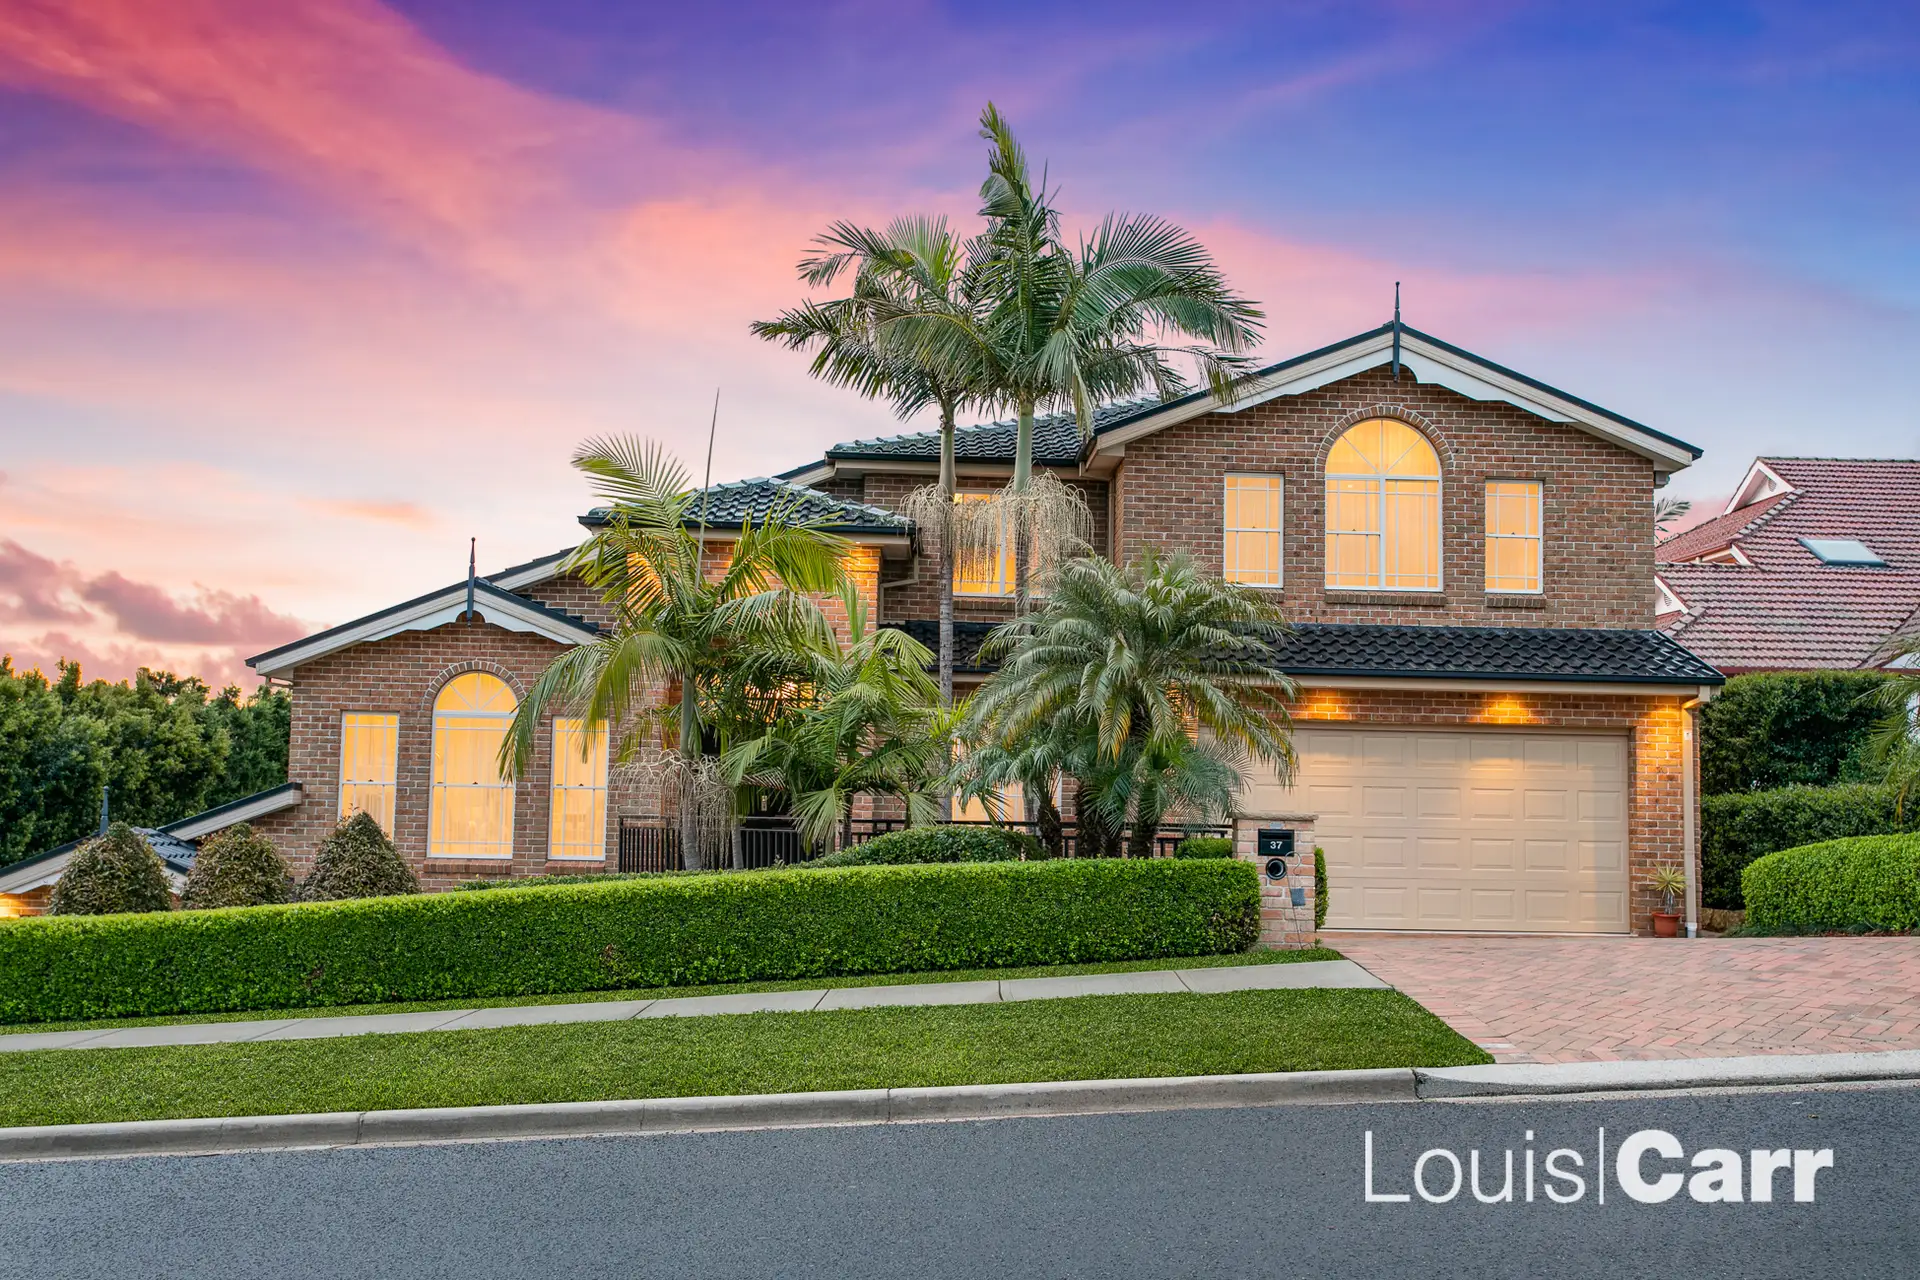 Photo #1: 37 Glenhope Road, West Pennant Hills - Sold by Louis Carr Real Estate